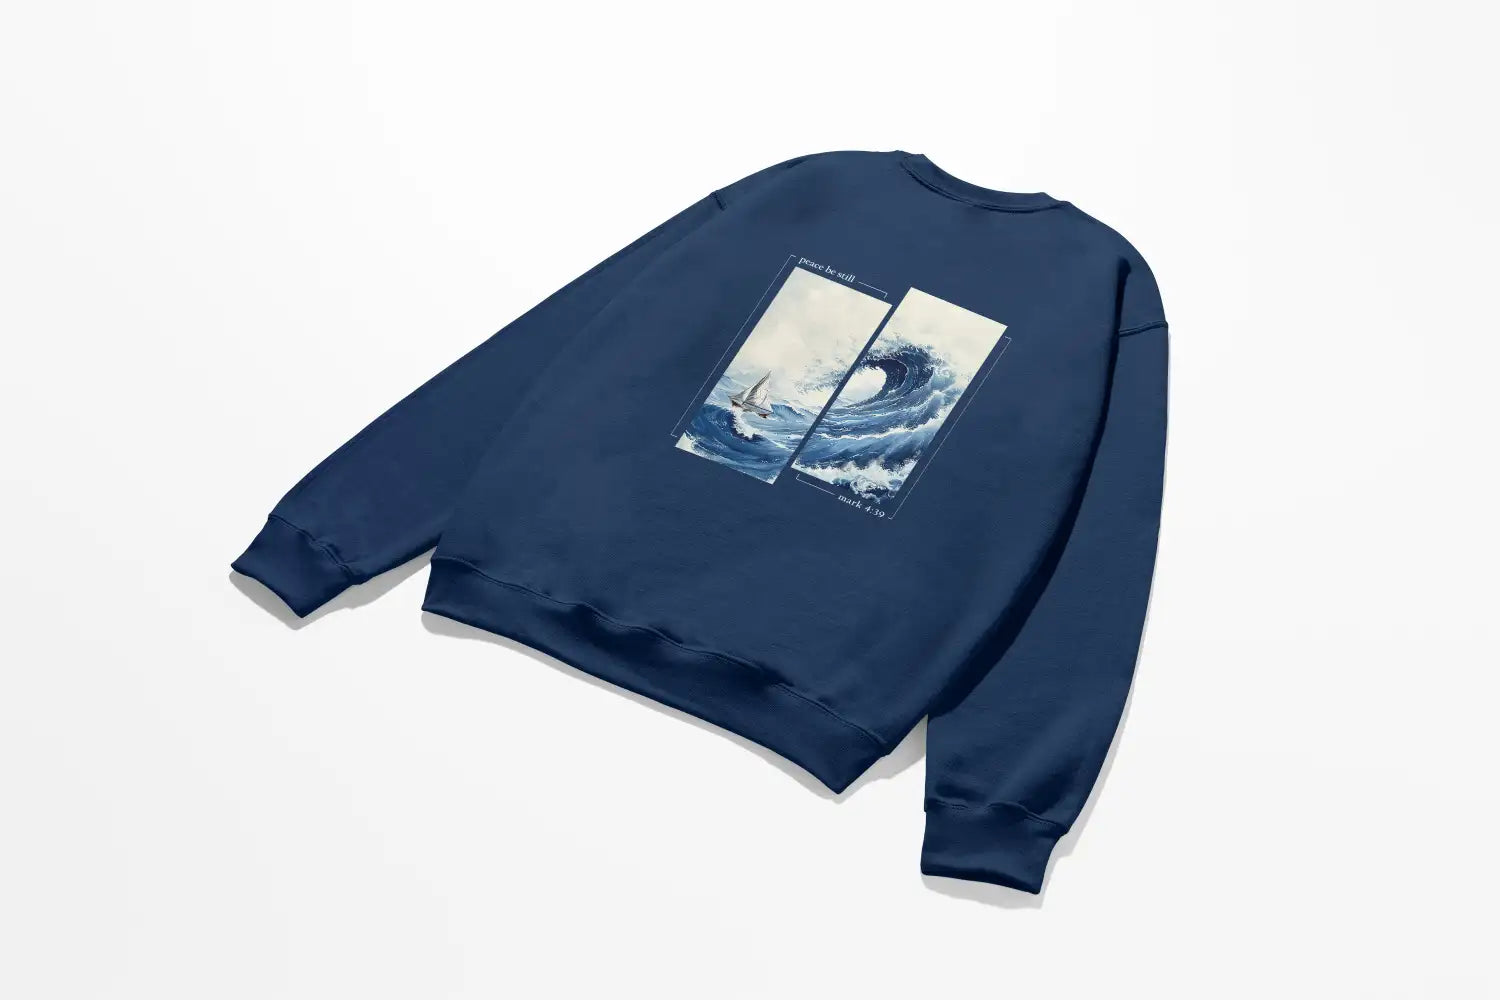 A Peace Be Still Sweatshirt from the Be Still and Know brand, ideal for Christian Apparel enthusiasts.